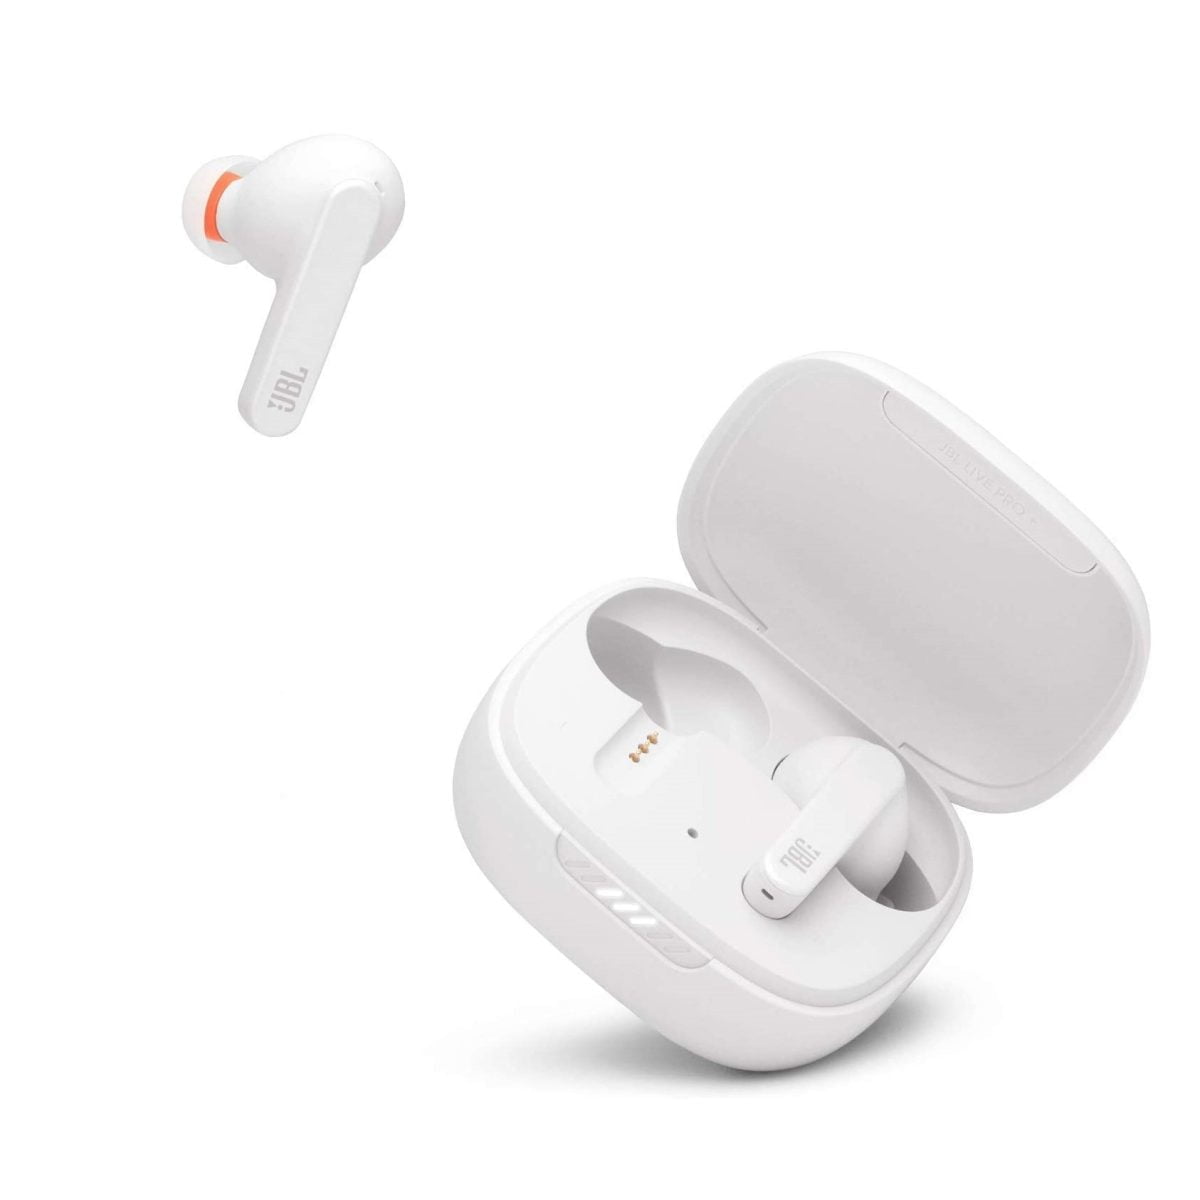 61Ijtu5Byul. Ac Sl1500 Jbl &Lt;H1&Gt;Jbl Live Pro Plus True Wireless Noise Cancelling Earbuds-White&Lt;/H1&Gt; Https://Www.youtube.com/Watch?V=Oan6Moxjv58 The Best Audio Solution Not Matter The Device, Jbl Live Pro+ Tws Delivers An Immersive True Wireless Experience With Incredible Jbl Signature Sound. Let Smart Ambient Connect You To Your Environment, Or Focus On The Music With Adaptive Noise Cancelling. Then Switch Easily From Tunes To Group Calls With 4 Mics (2 Beamforming Mics Per Side) To Capture Your Voice With The Feeling Of Face-To-Face Conversation And A Third Mic For Environmental Noise Reduction. All Commands Are On The Earbuds, So You Can Manage Music And Calls With Your Finger Only. Jbl Earbuds Jbl Live Pro Plus Noise Cancelling Earbuds-White